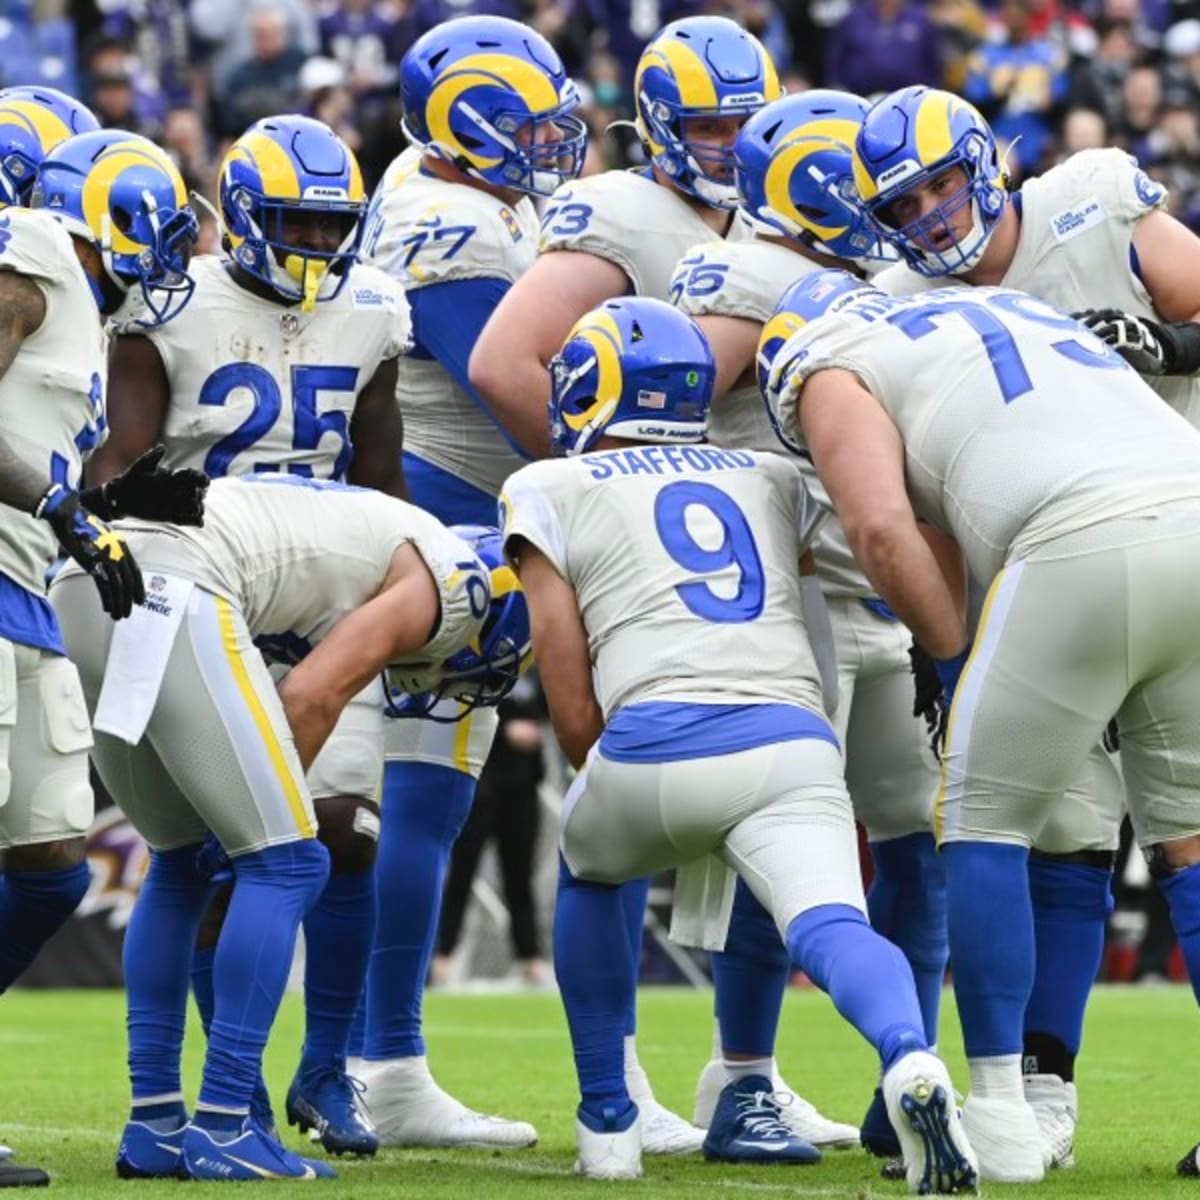 La Rams Home Schedule 2022 Los Angeles Rams' 2022 Opponents Finalized - Sports Illustrated La Rams  News, Analysis And More